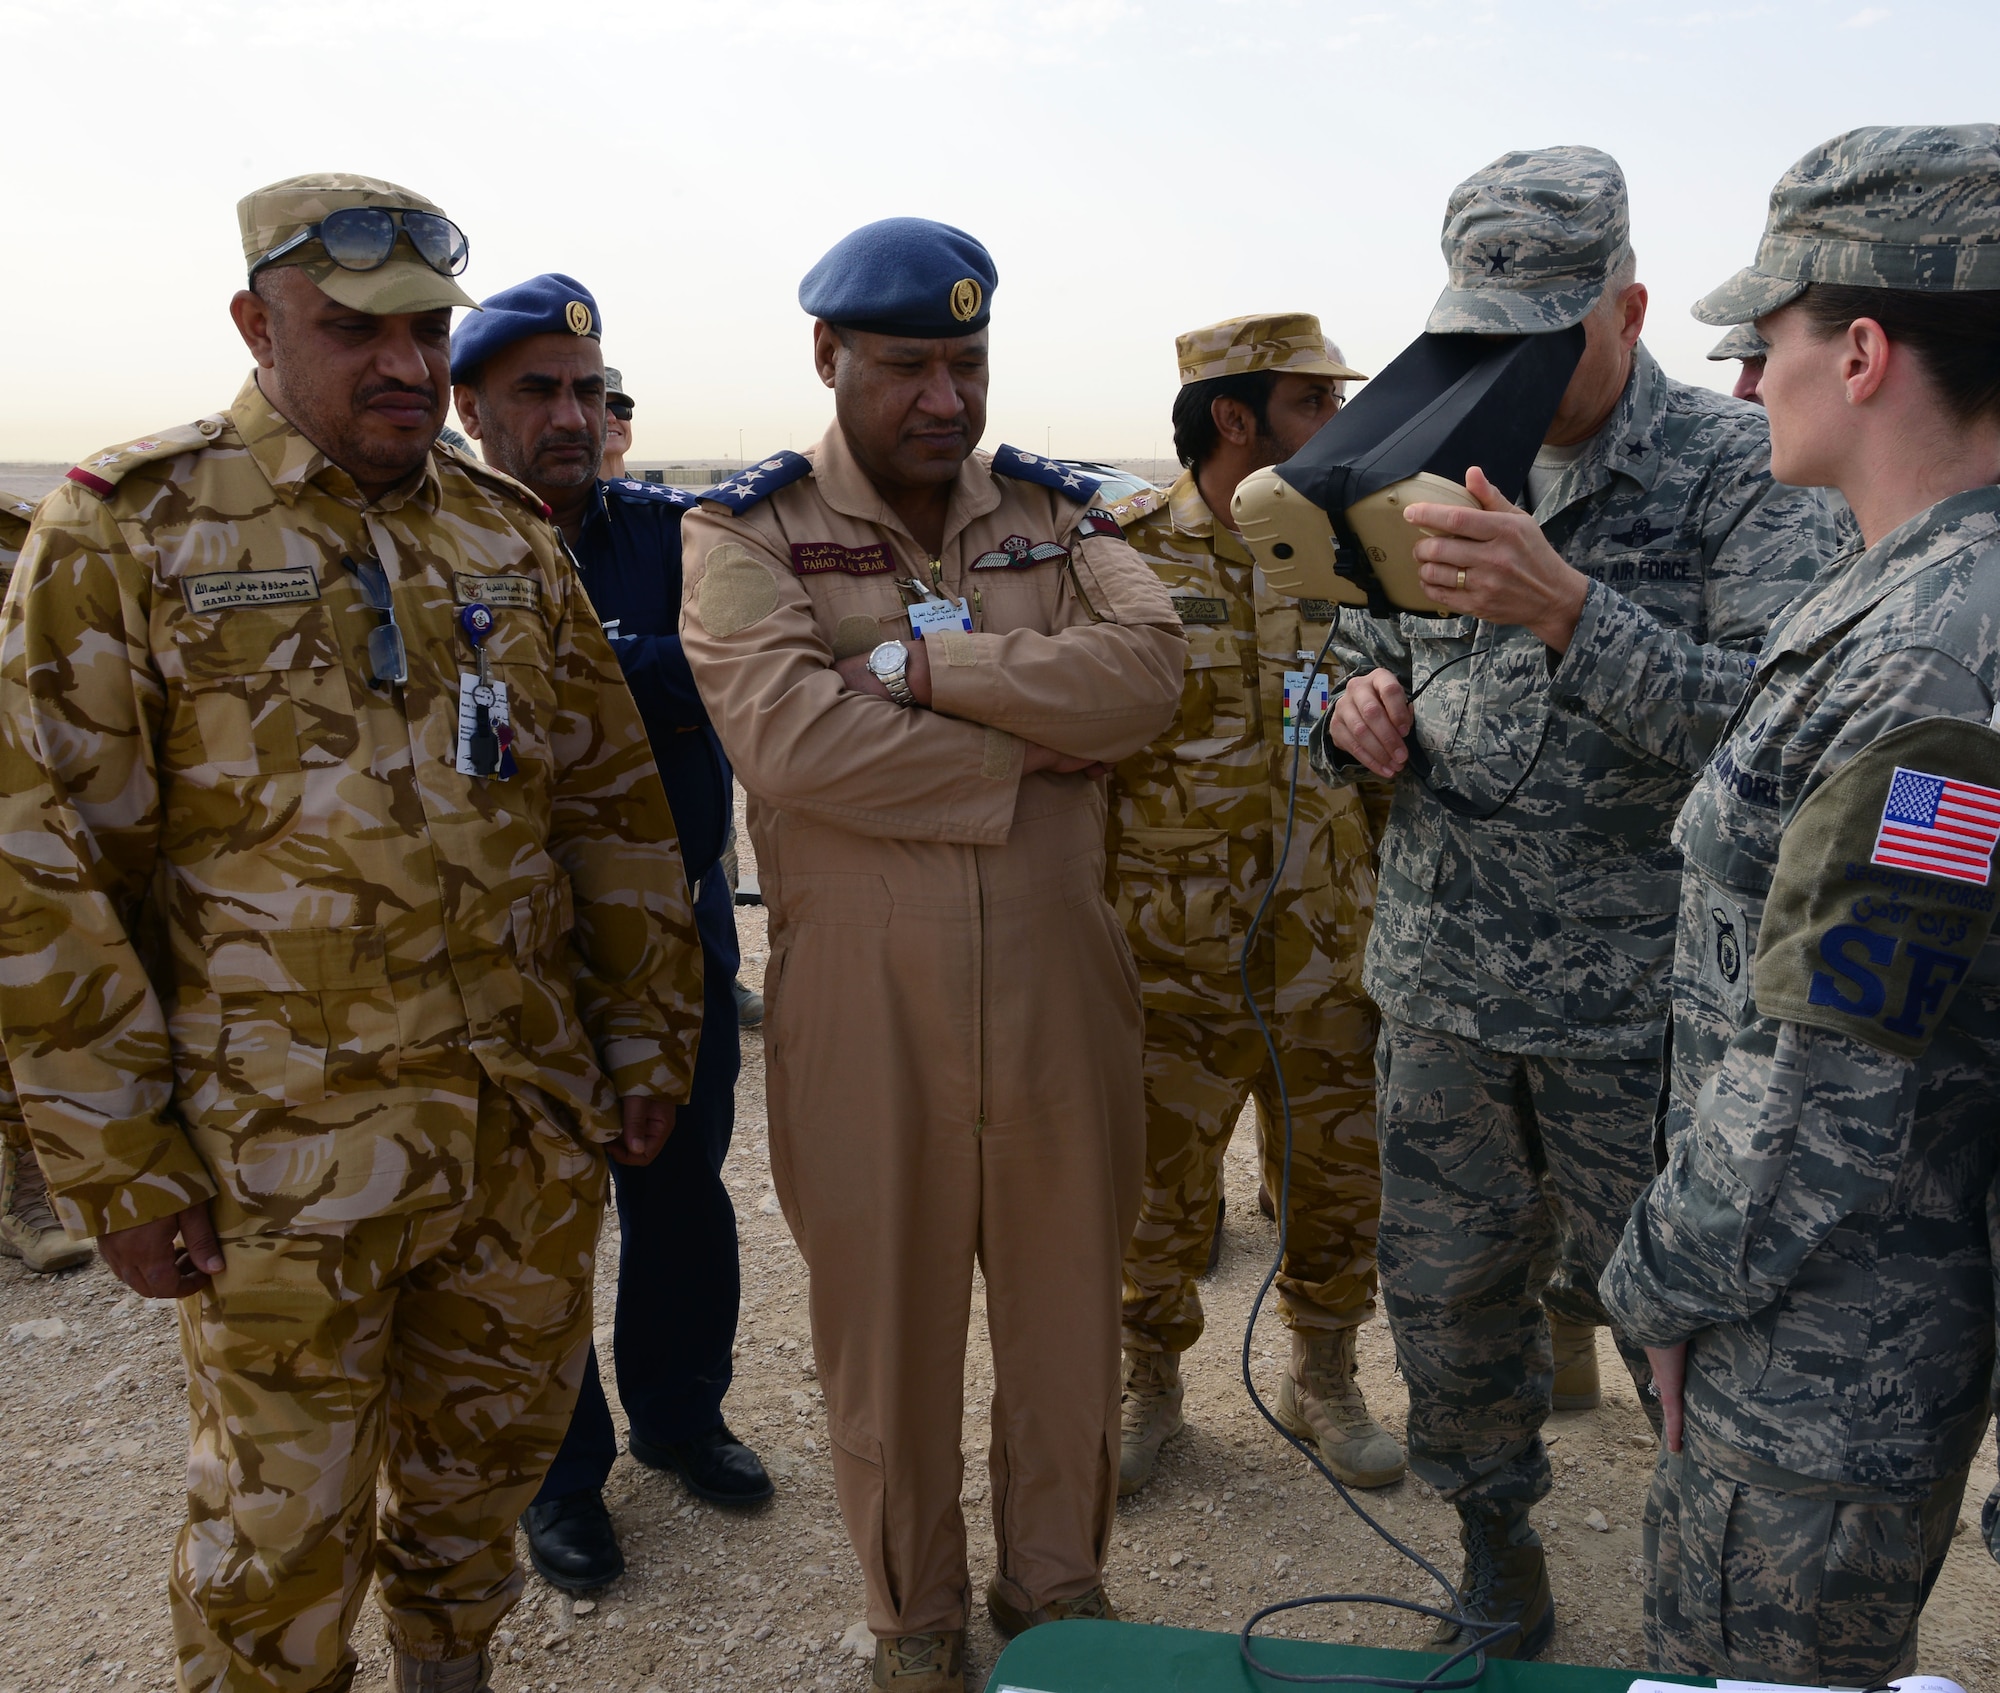 U.S. Air Force Brig. Gen. Darren Hartford (right), 379th Air Expeditionary Wing commander use remote hand controller to view real-time footage from an R-11B Raven during an aerial demonstration at Al Udeid AB, Qatar, March 4, 2015.  The RQ-11 Raven is a lightweight unmanned aircraft system that’s designed for rapid deployment and high-mobility for military operations. At Al Udeid, security forces Airmen use the Raven to support anti-terrorism measures like day or night aerial intelligence, surveillance, target acquisition, and reconnaissance. This is the first time since 2005 that the Raven has been used at Al Udeid. (Air Force photo by Master Sgt. Kerry Jackson) 